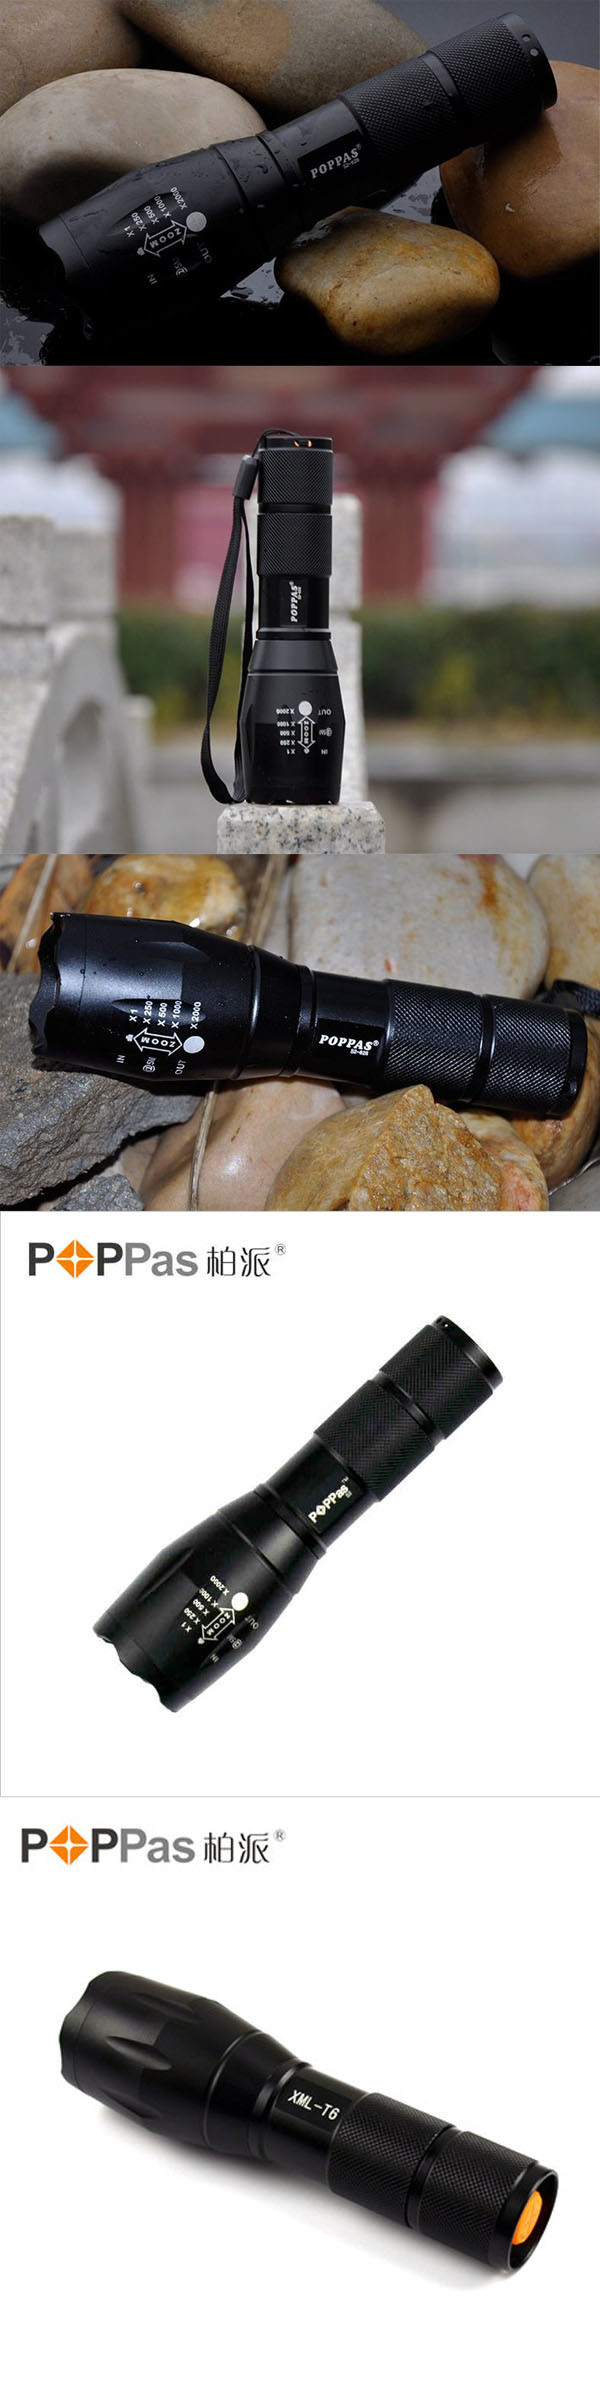 CREE Xm-L T6 Focus Adjustable High Power LED Rechargeable Torch